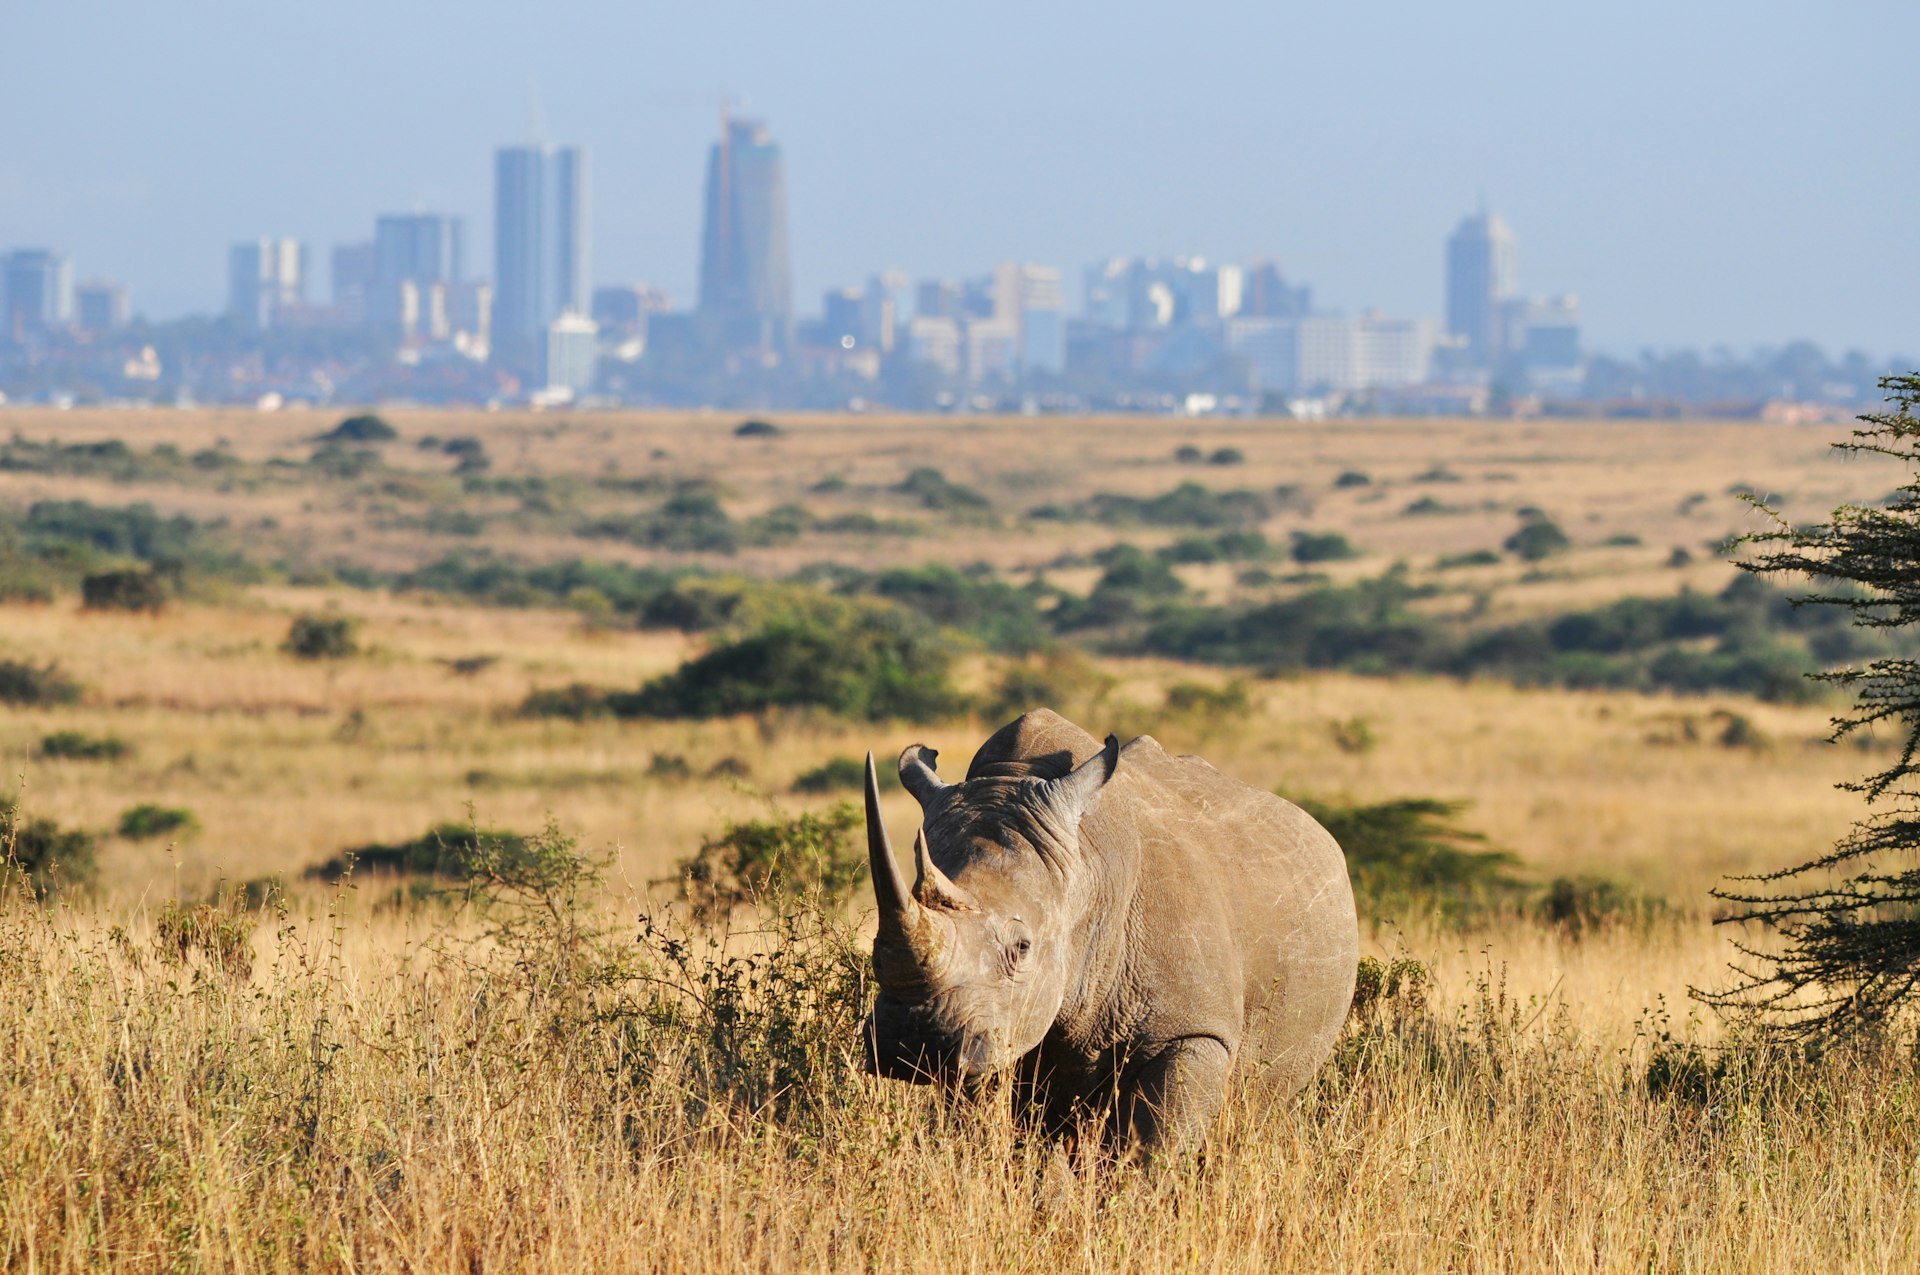 A rhino in wanders around in Nairobi National Park with the city's skyline in the background